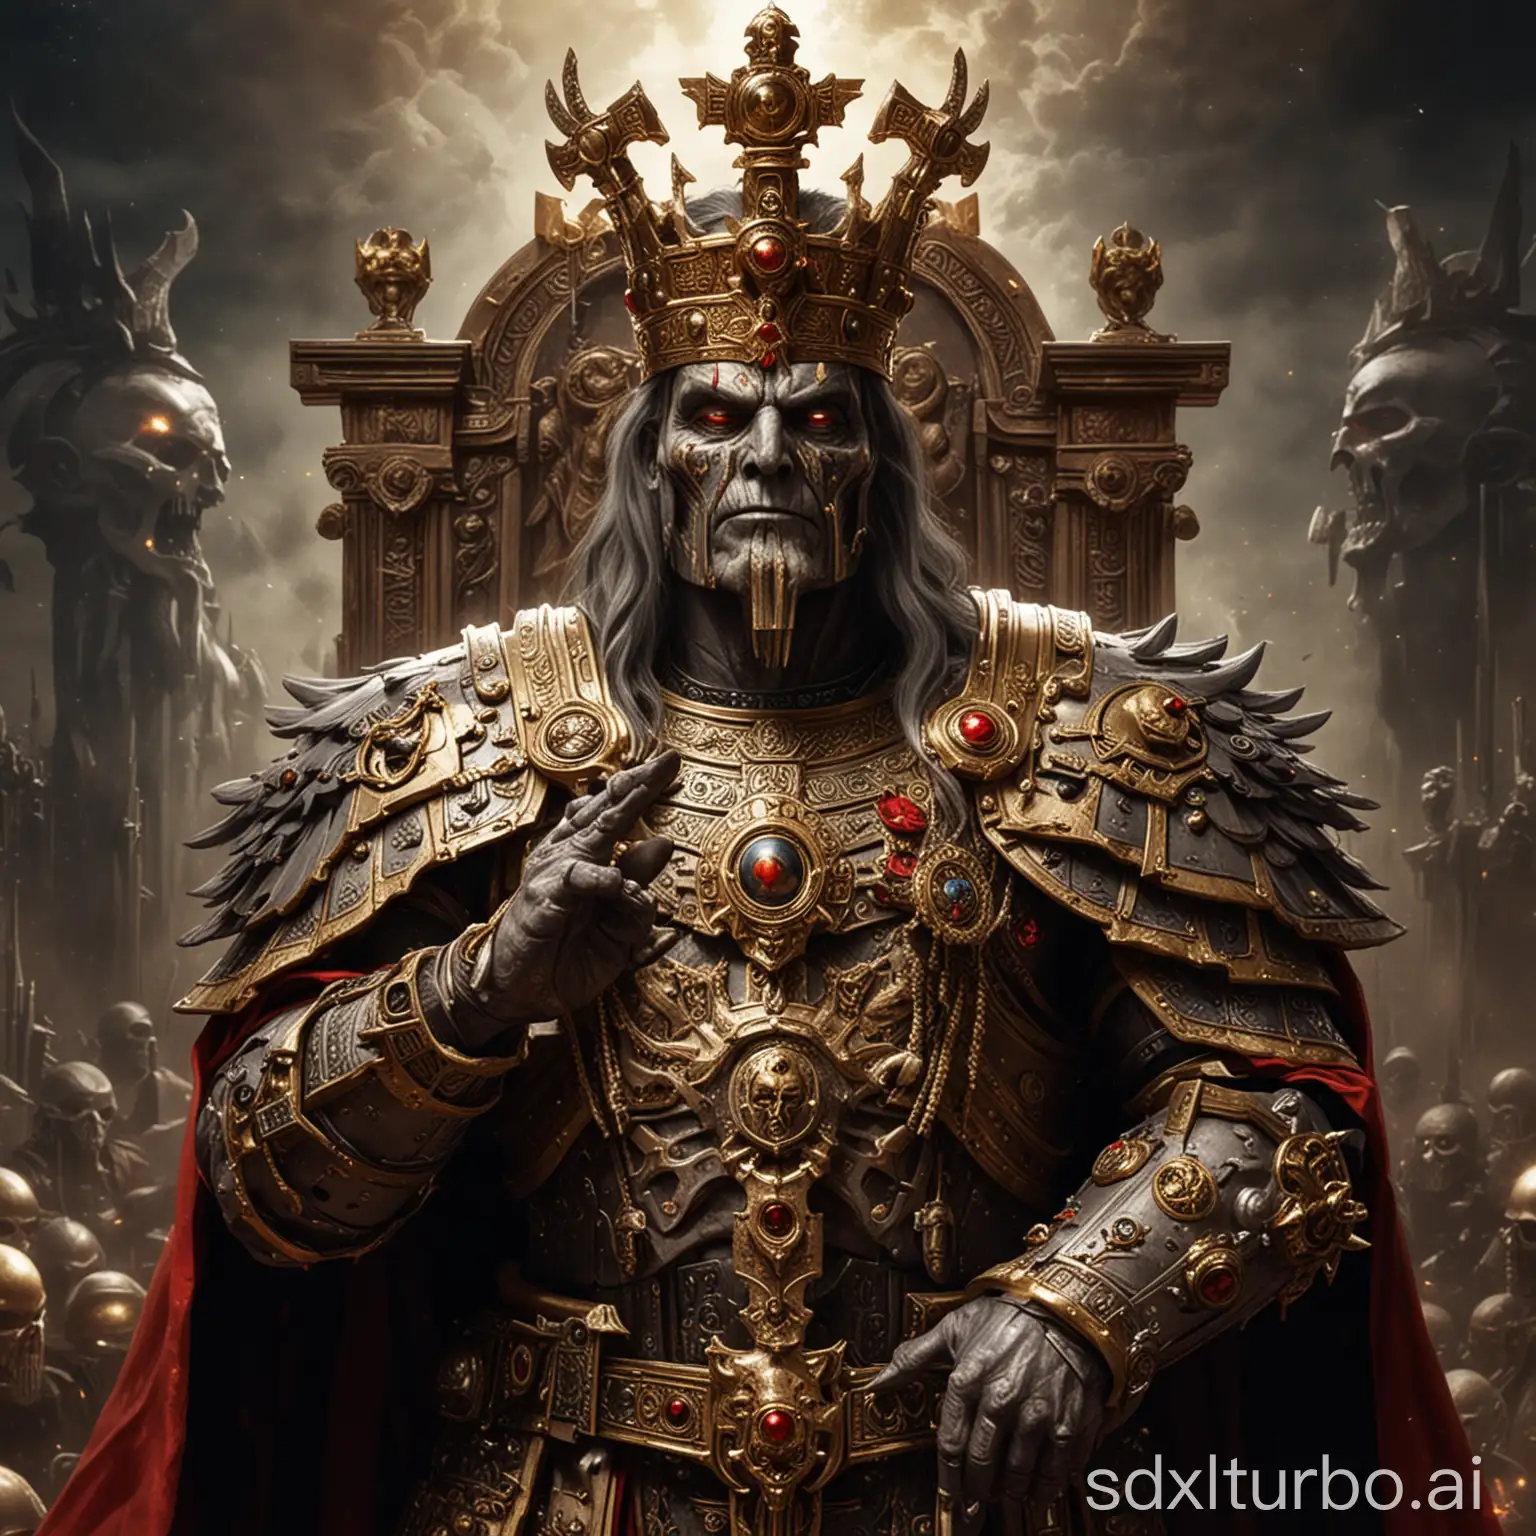 The emperor of mankind